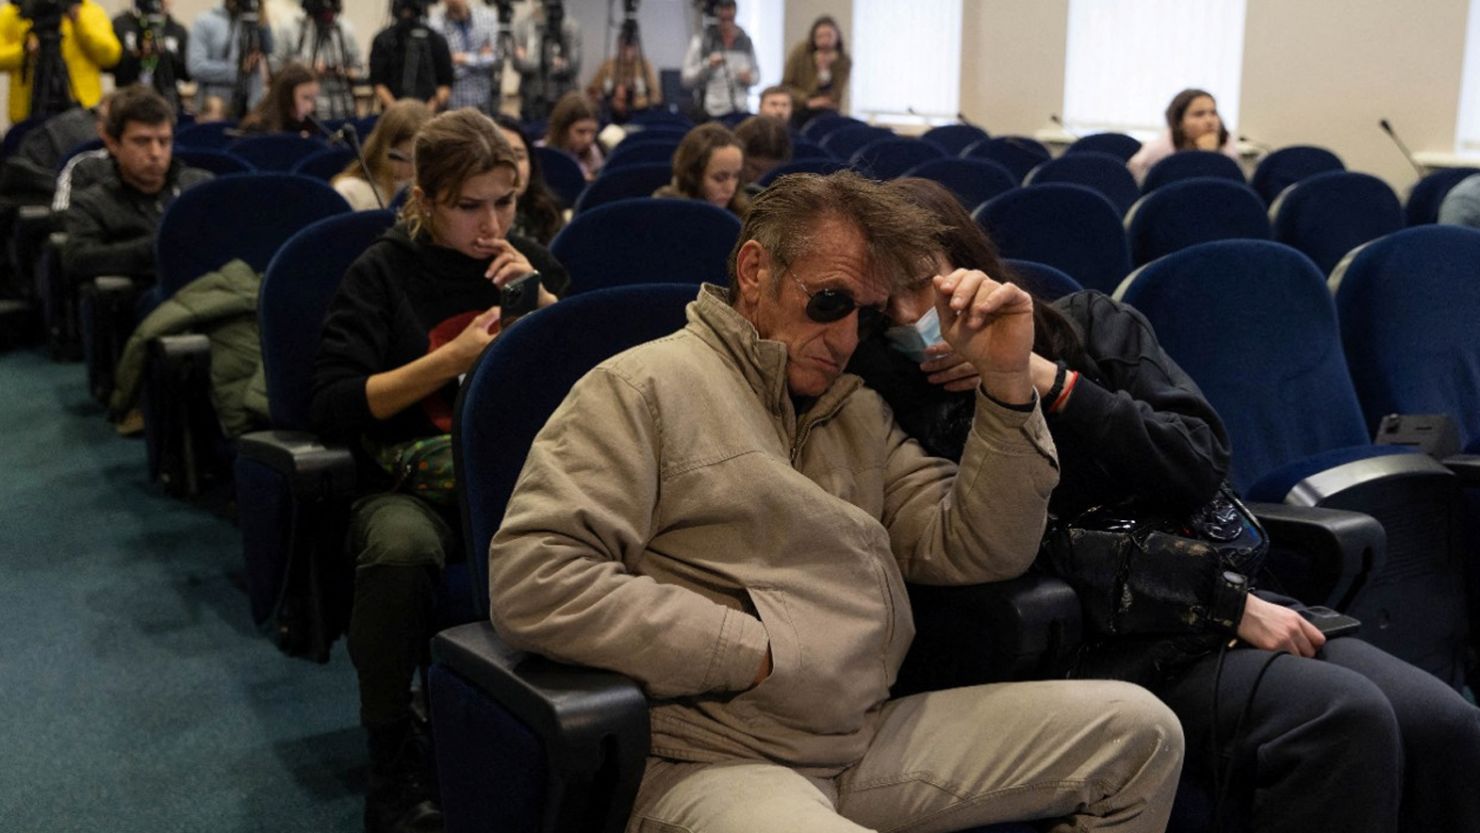 Actor and director Sean Penn attends a press briefing at the Presidential Office in Kyiv, Ukraine on Feb 24. He was in the country to film a documentary but has since left.